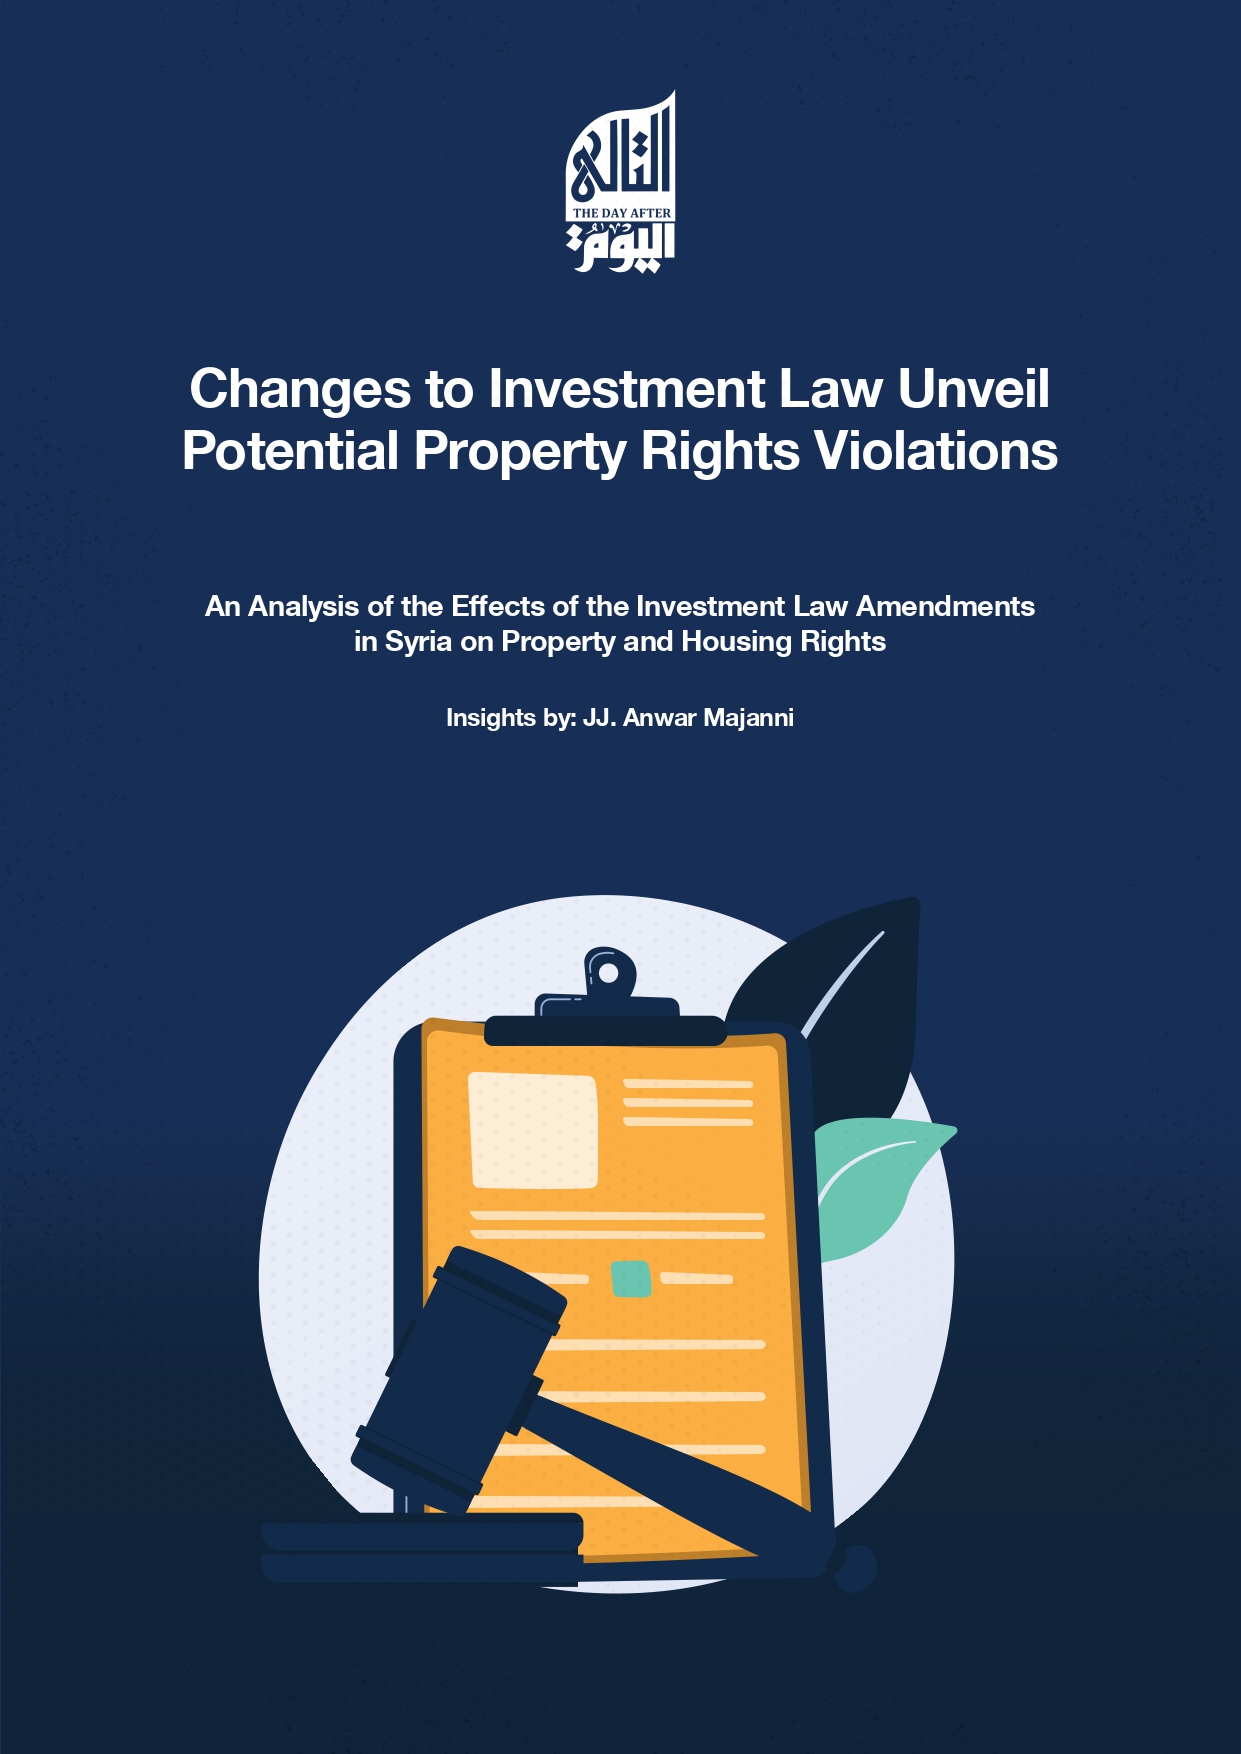 Changes to Investment Law Unveil Potential Property Rights Violations